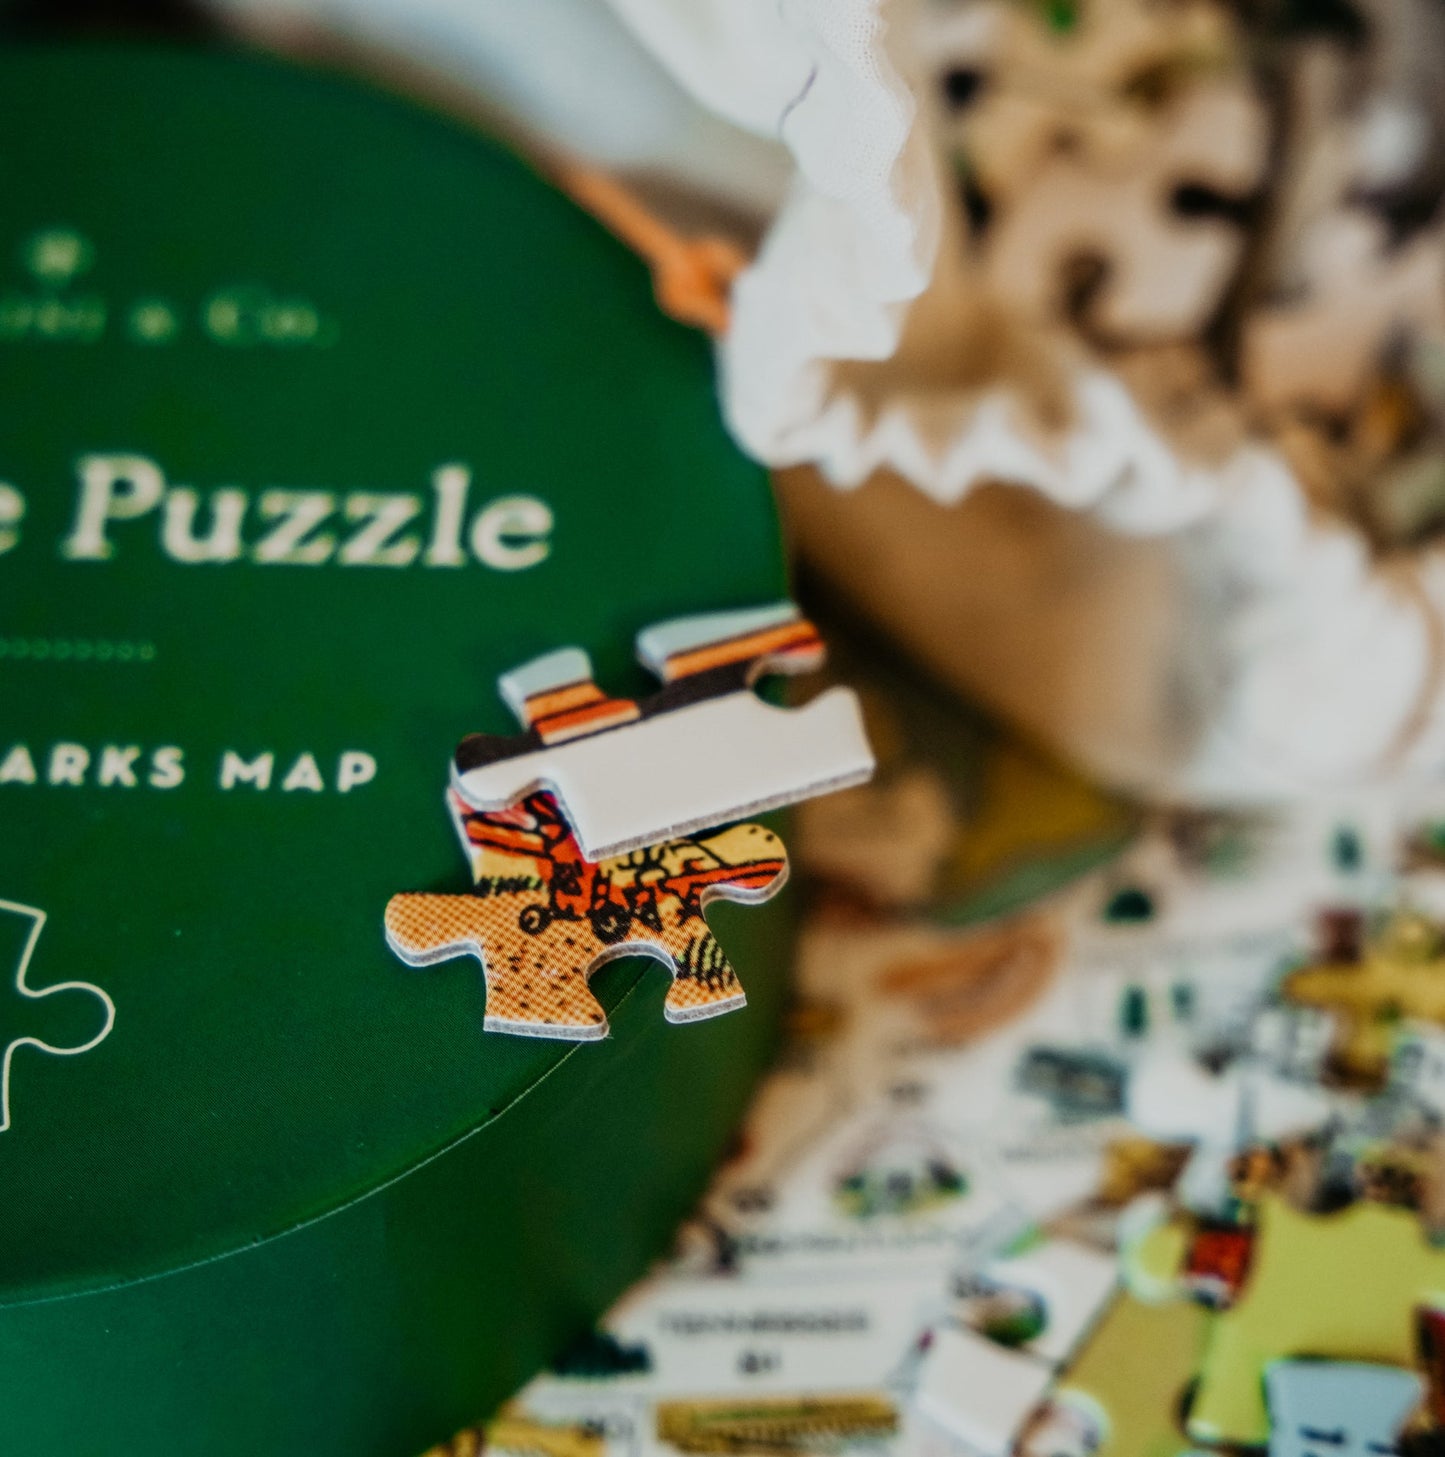 National Parks Map Puzzle